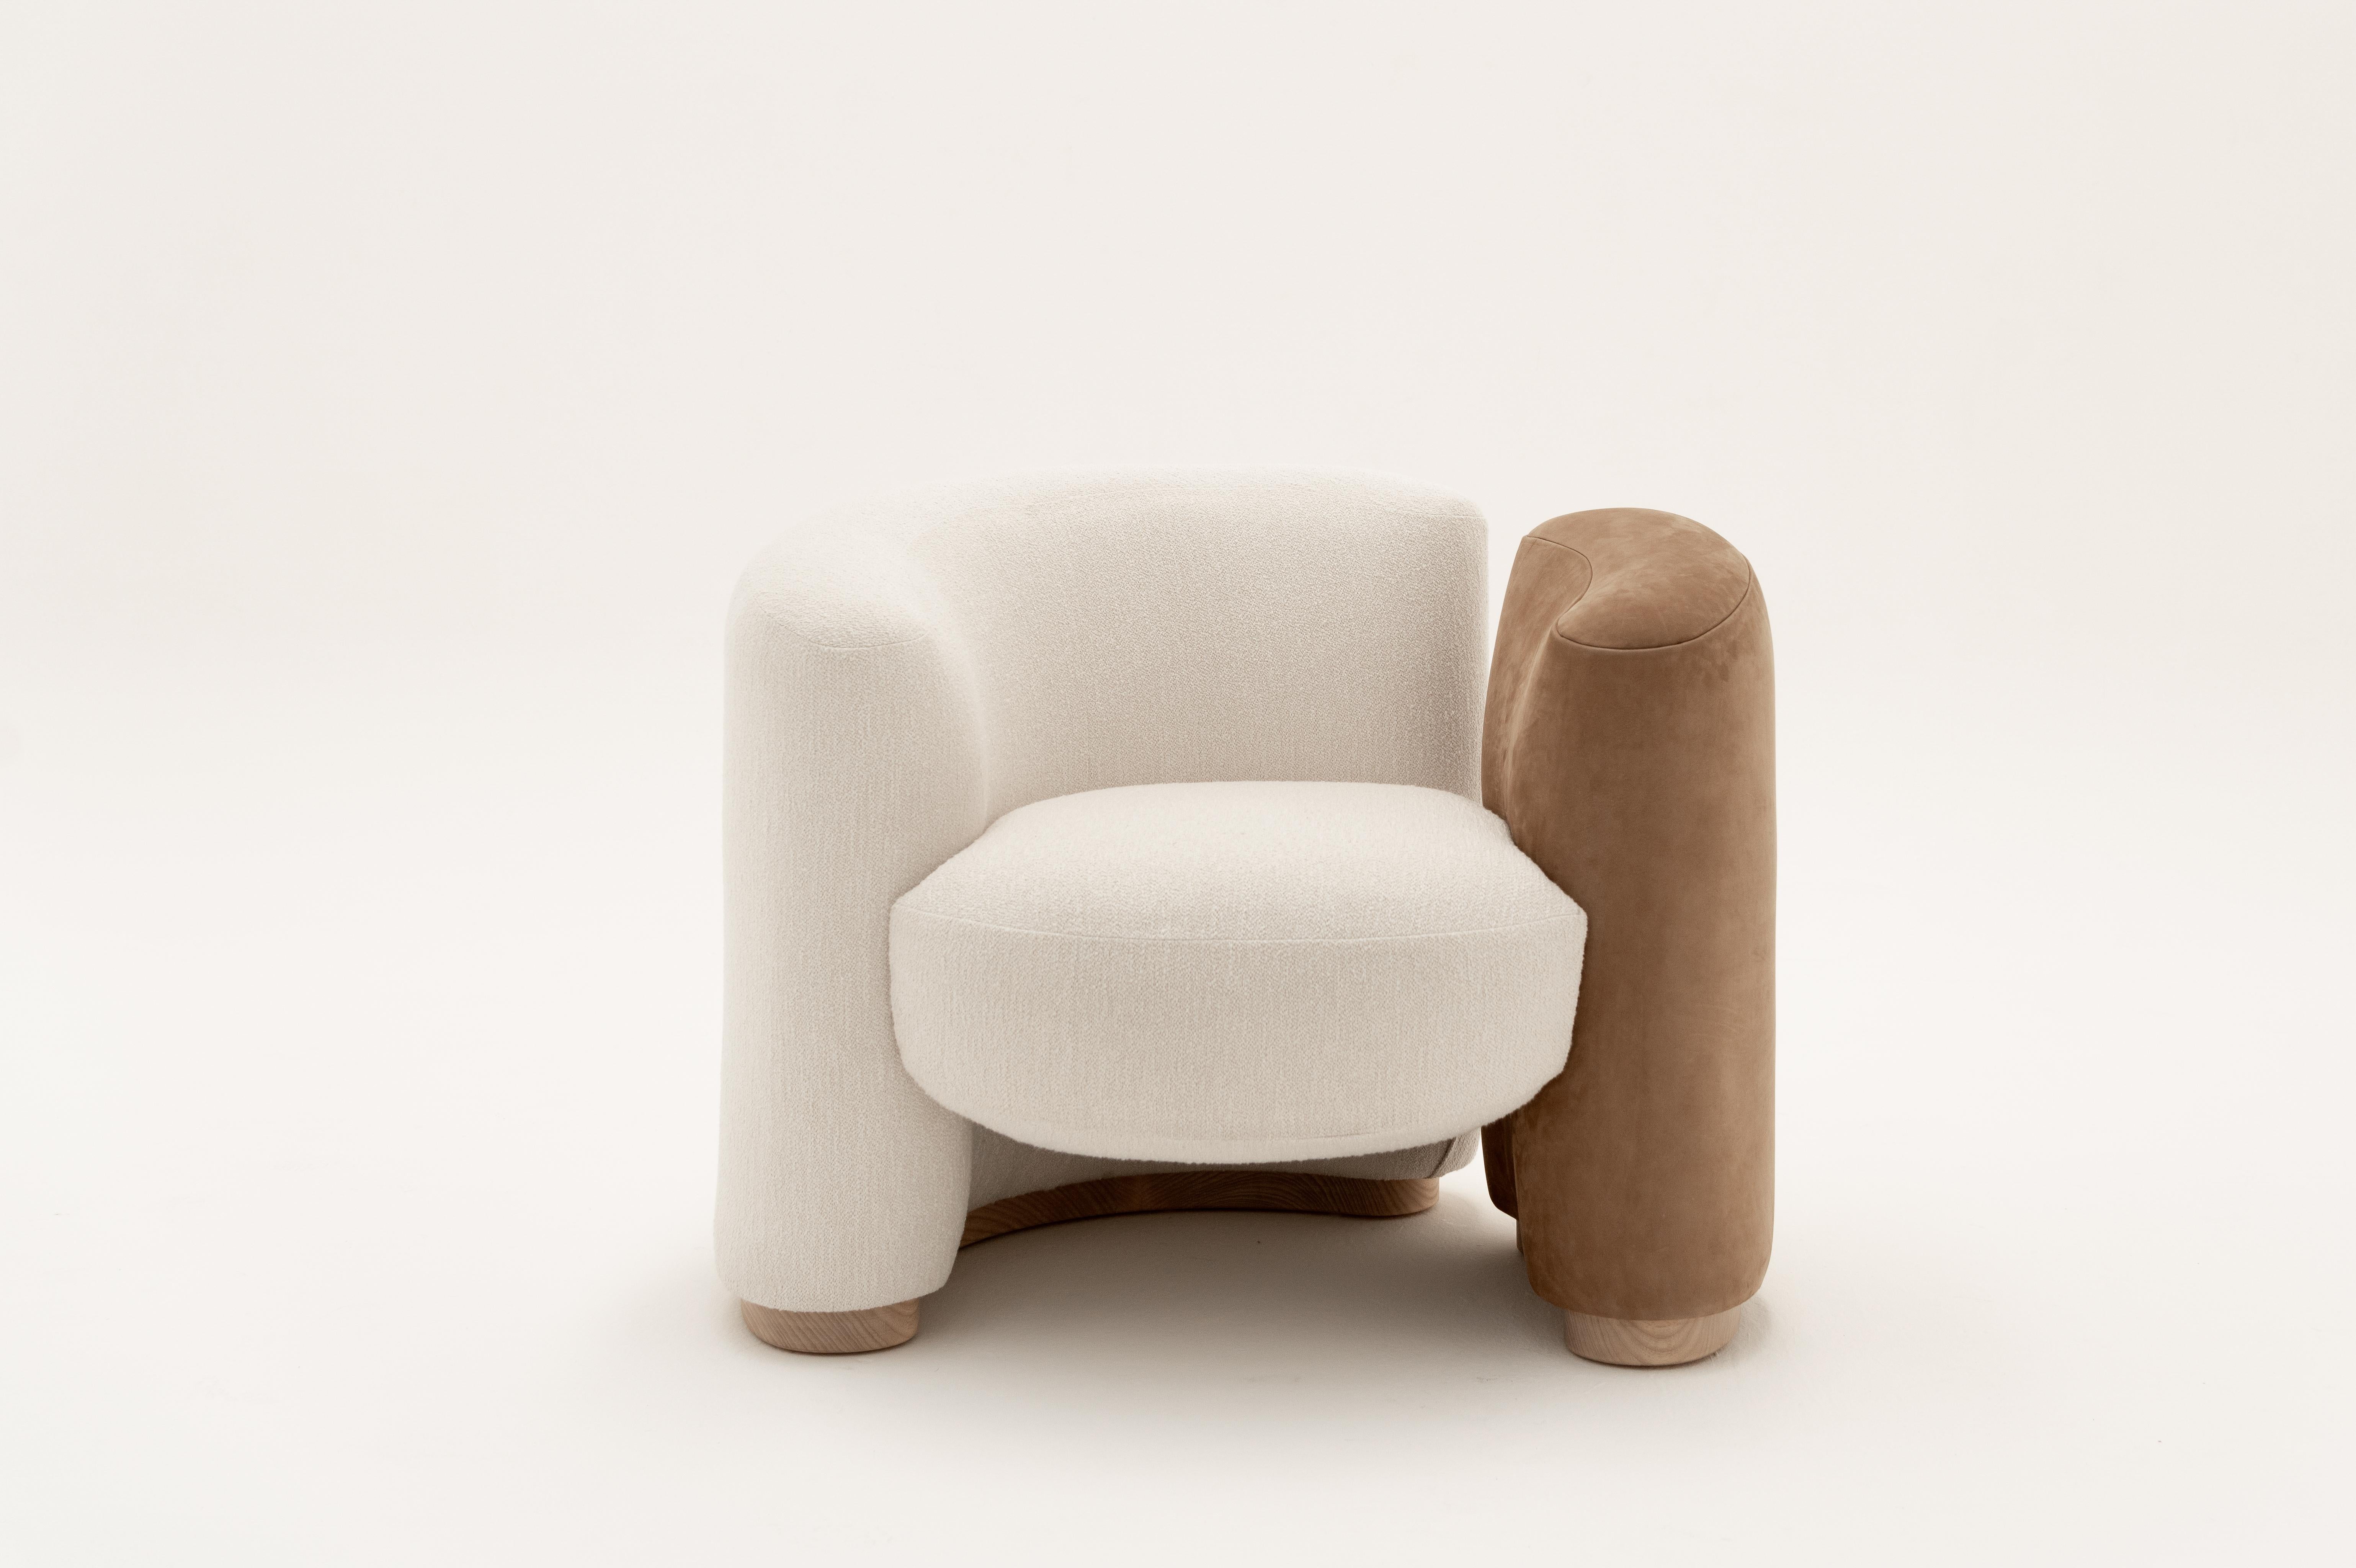 A conversational armchair built by a unique assembly process of three separate elements, with a subtle visual effect intended to create a classic, but infinitely bold piece. Inspired by the elegance and silhouette of the famous Mexican actress